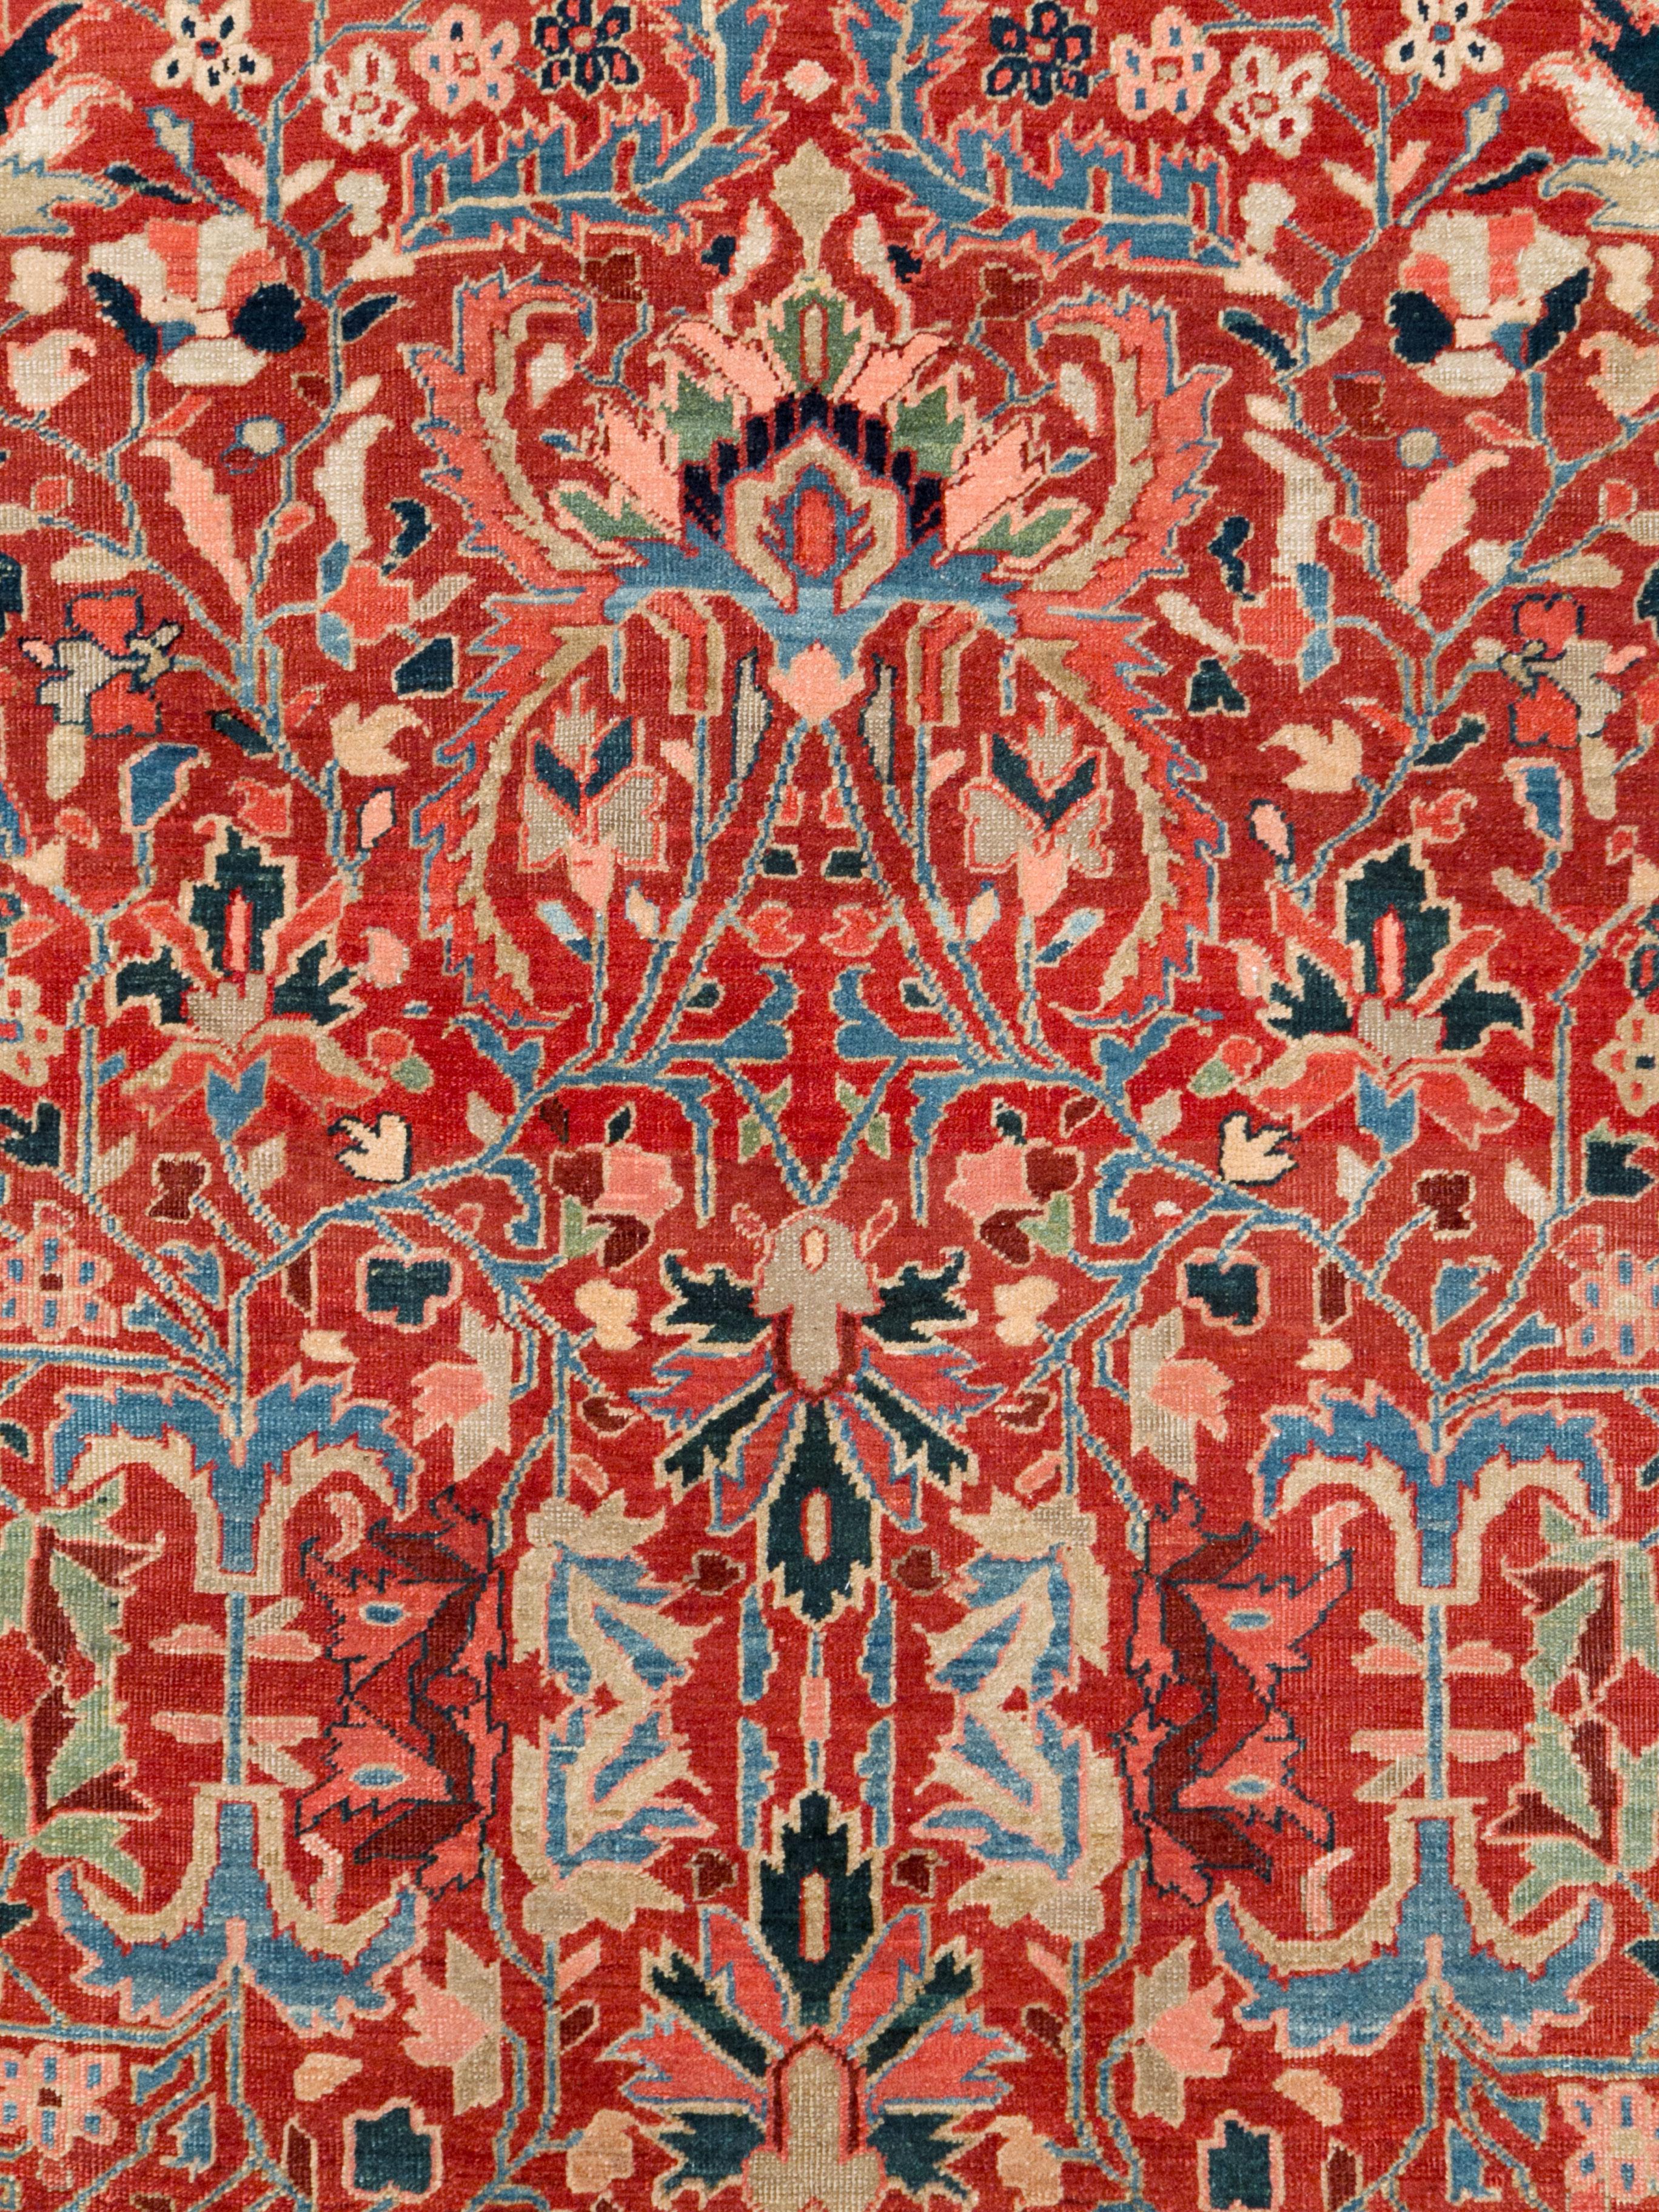 An antique Persian Heriz carpet from the early 20th century.